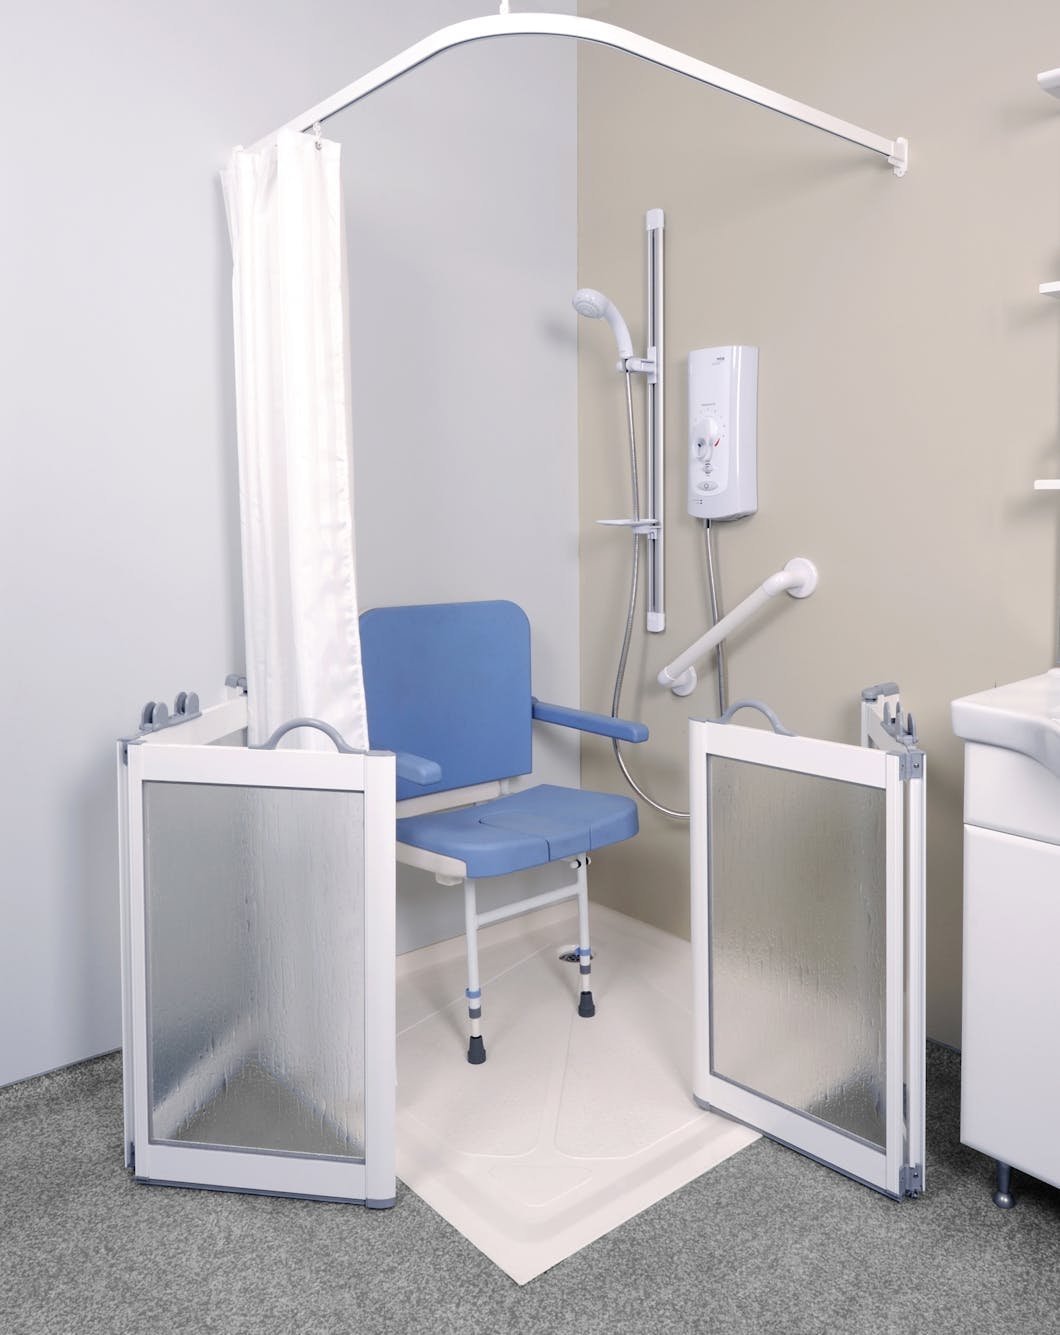 Our disabled shower adaptations are bespoke in design and unique in use and installation because we create, and propose, specific solutions that cater for an individuals wants, needs and requirements.